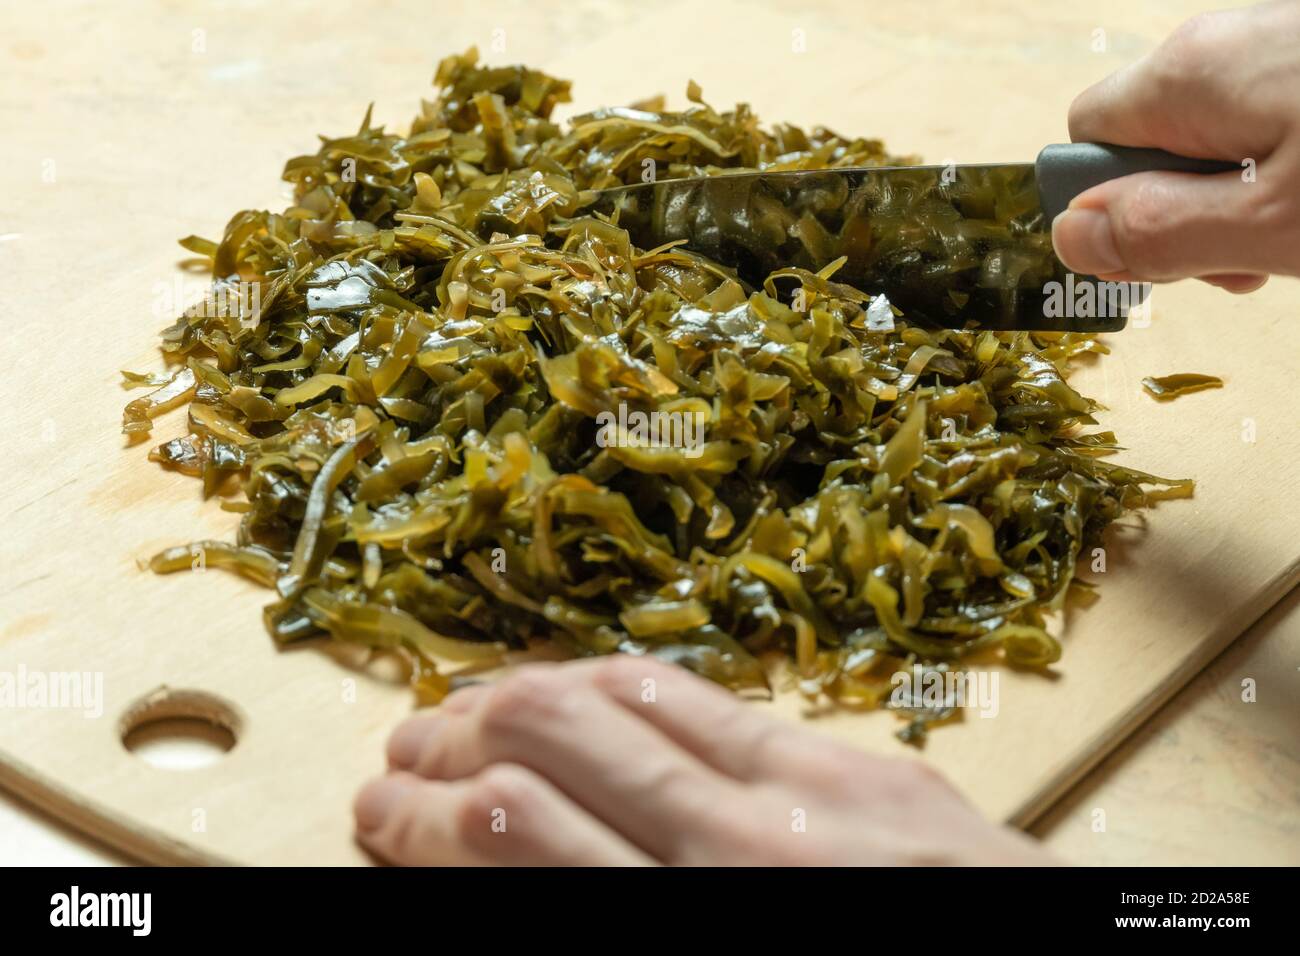 Women's hands cut green seaweed Laminaria on a wooden Board with a kitchen knife close up Stock Photo